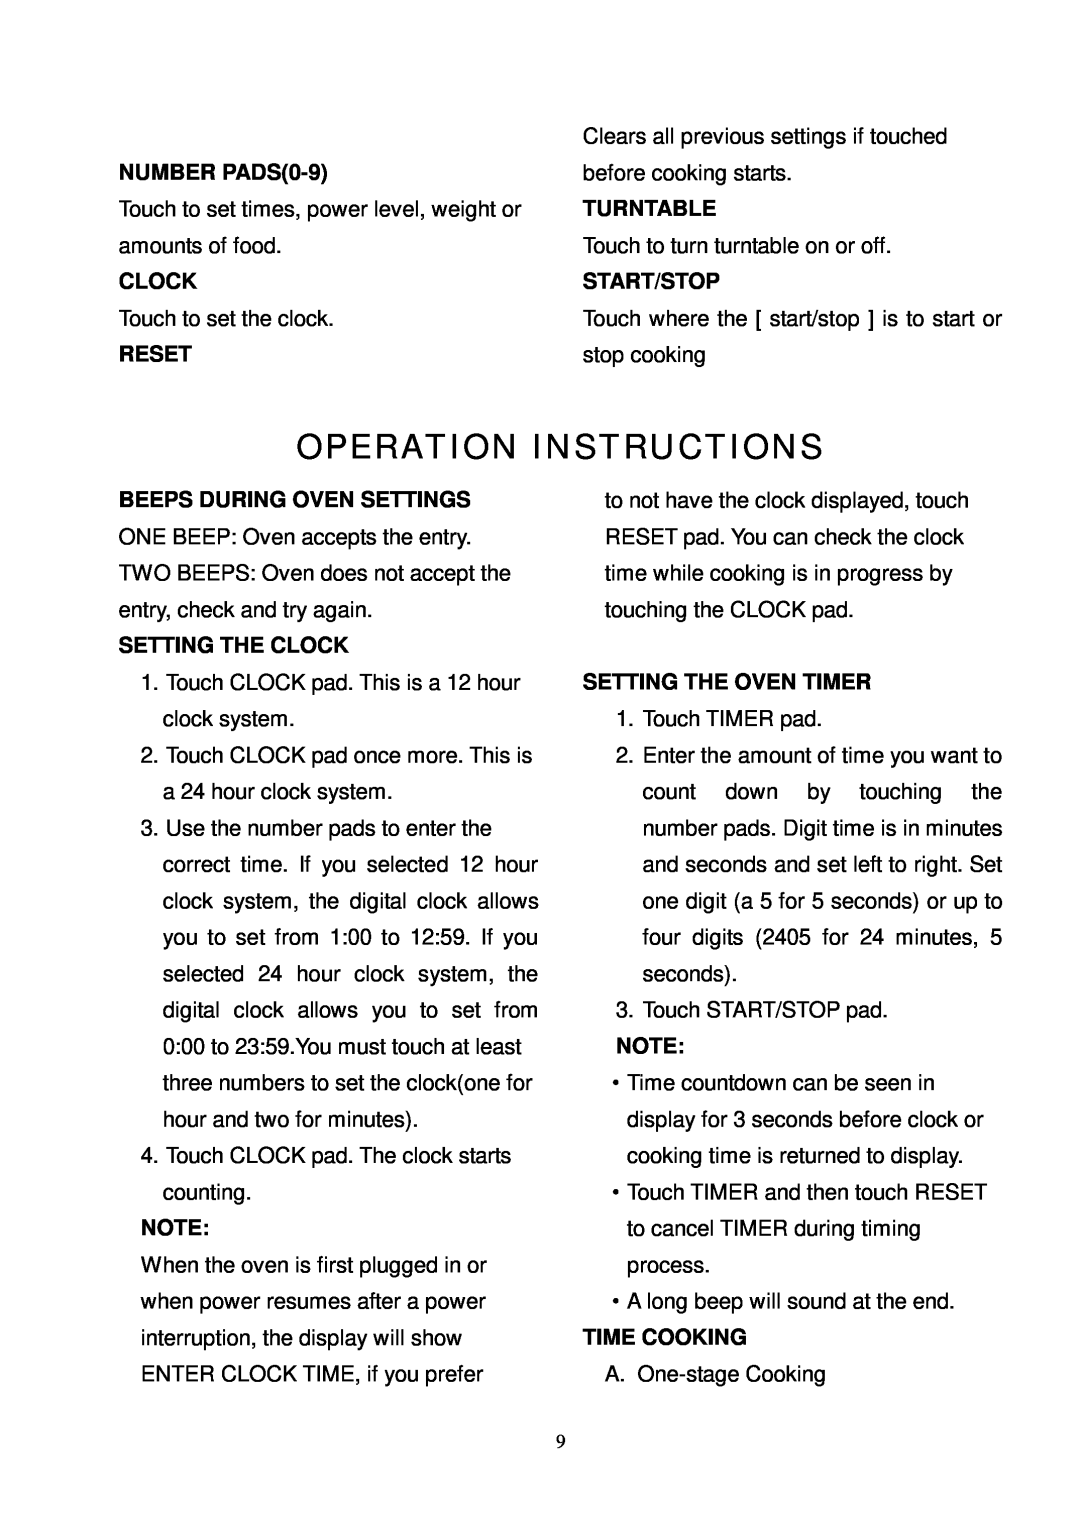 Oster OMW1480 Operation Instructions, NUMBER PADS0-9, Clock, Reset, Turntable, Start/Stop, Beeps During Oven Settings 